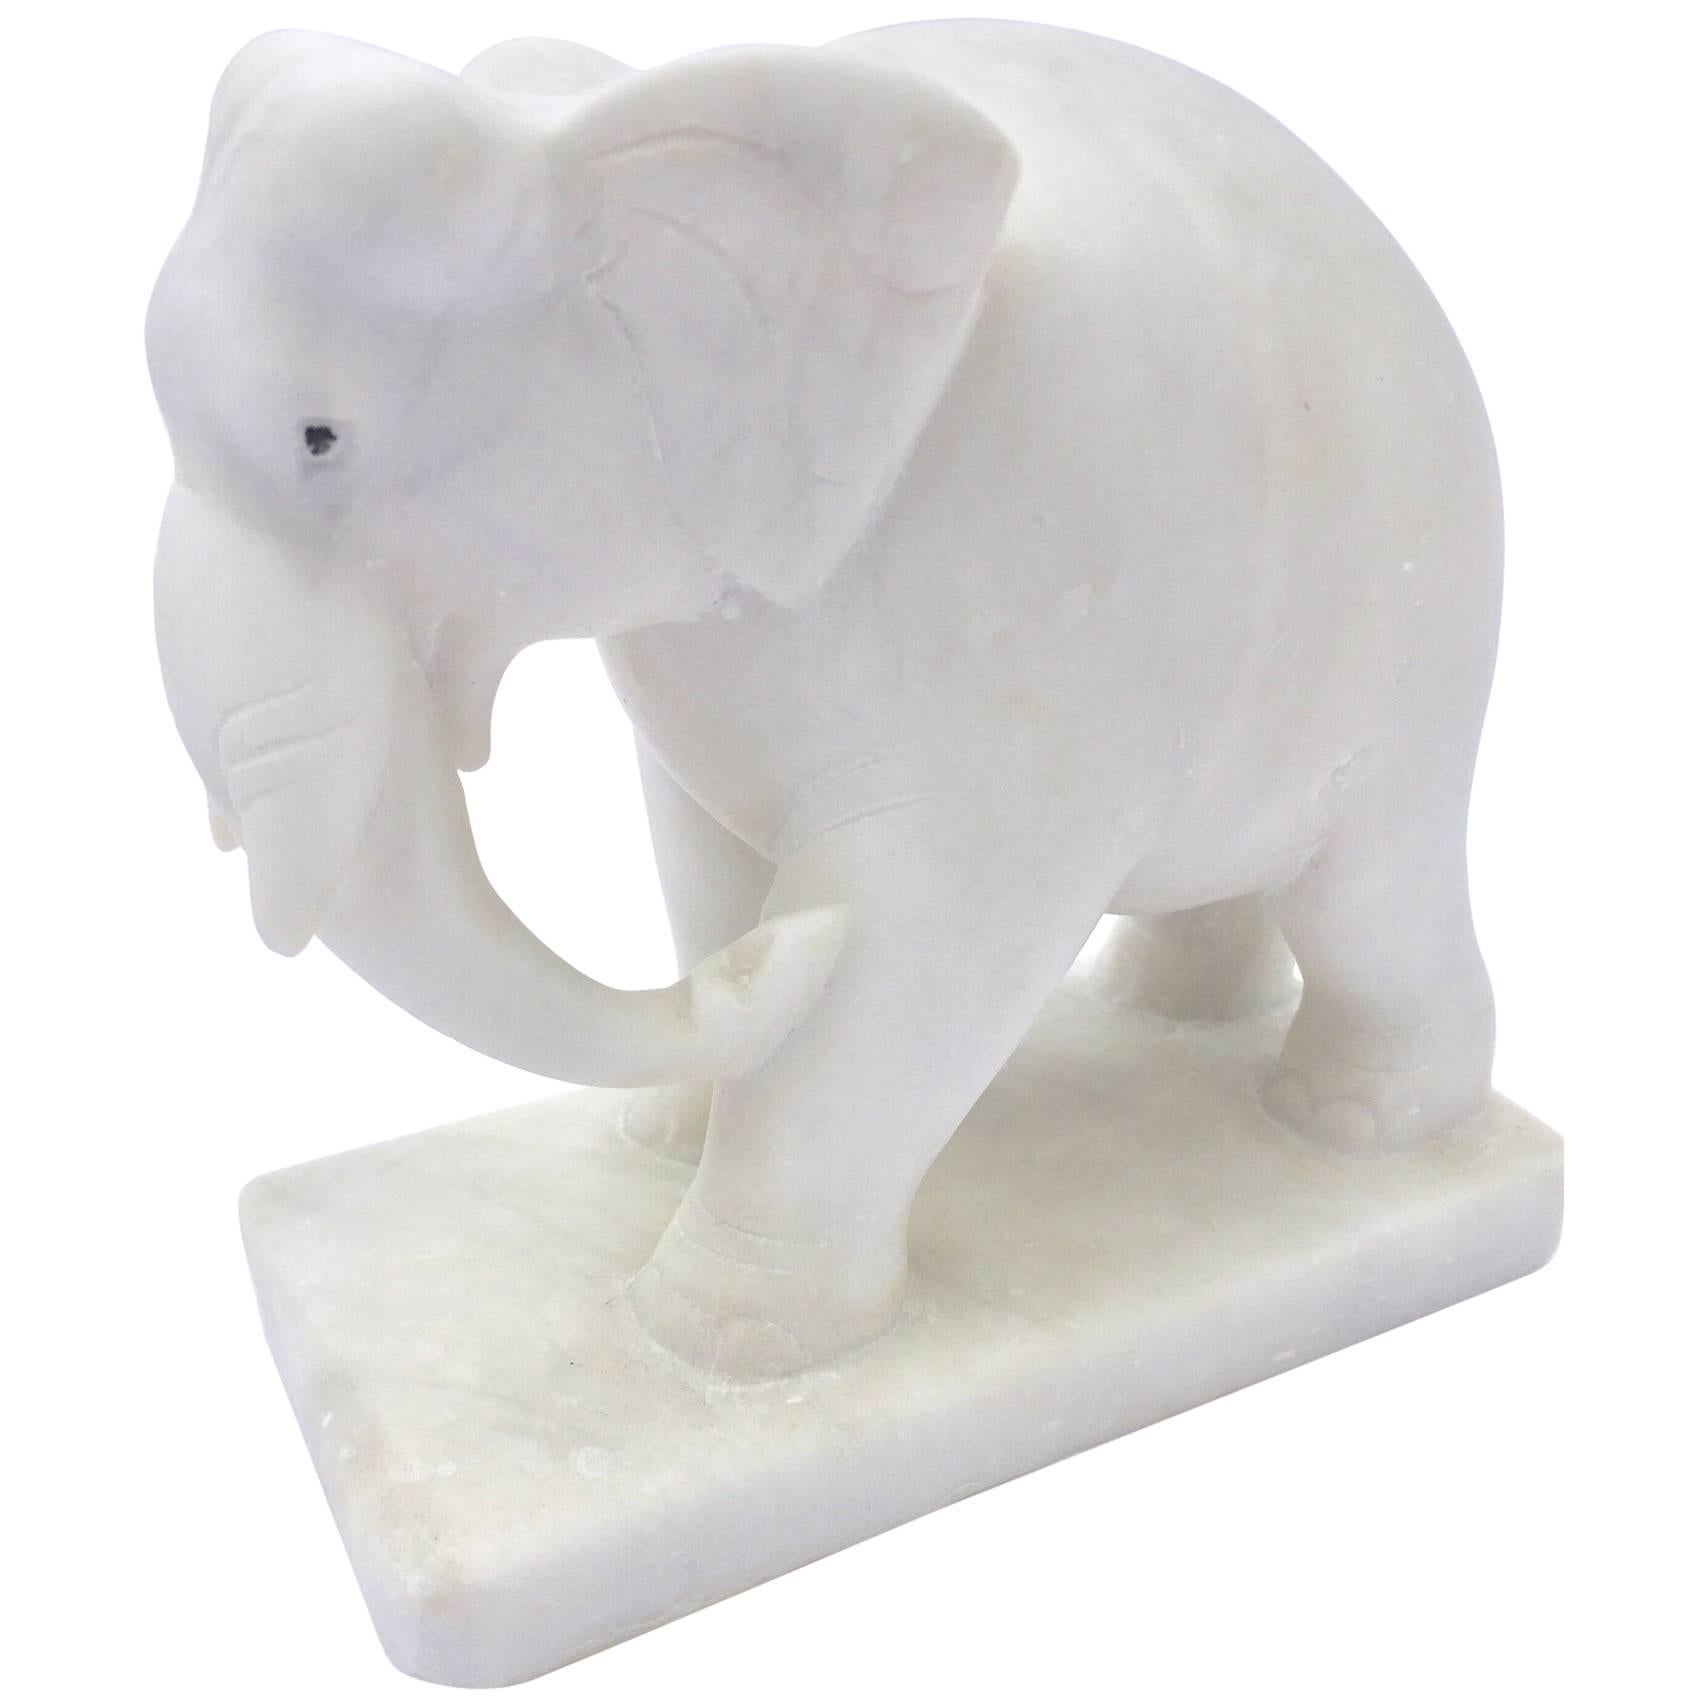 Hand-Carved White Elephant Marble Sculpture Jaipur, Rajasthan India